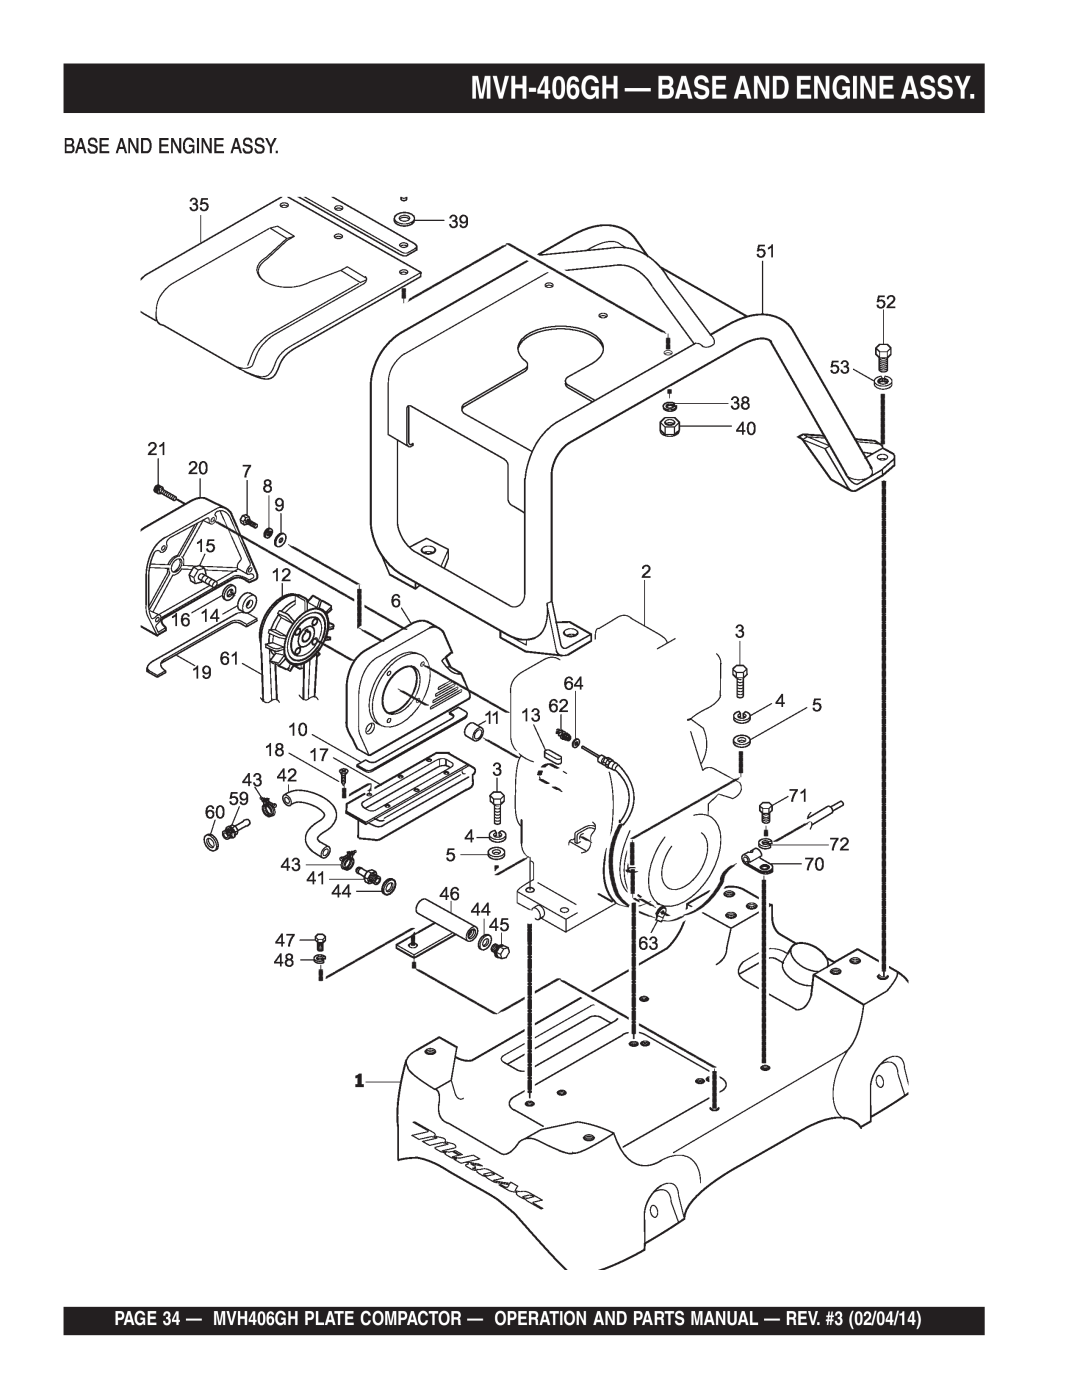 Multiquip MVH406GH manual MVH-406GH - BASE AND ENGINE ASSY, Base And Engine Assy 